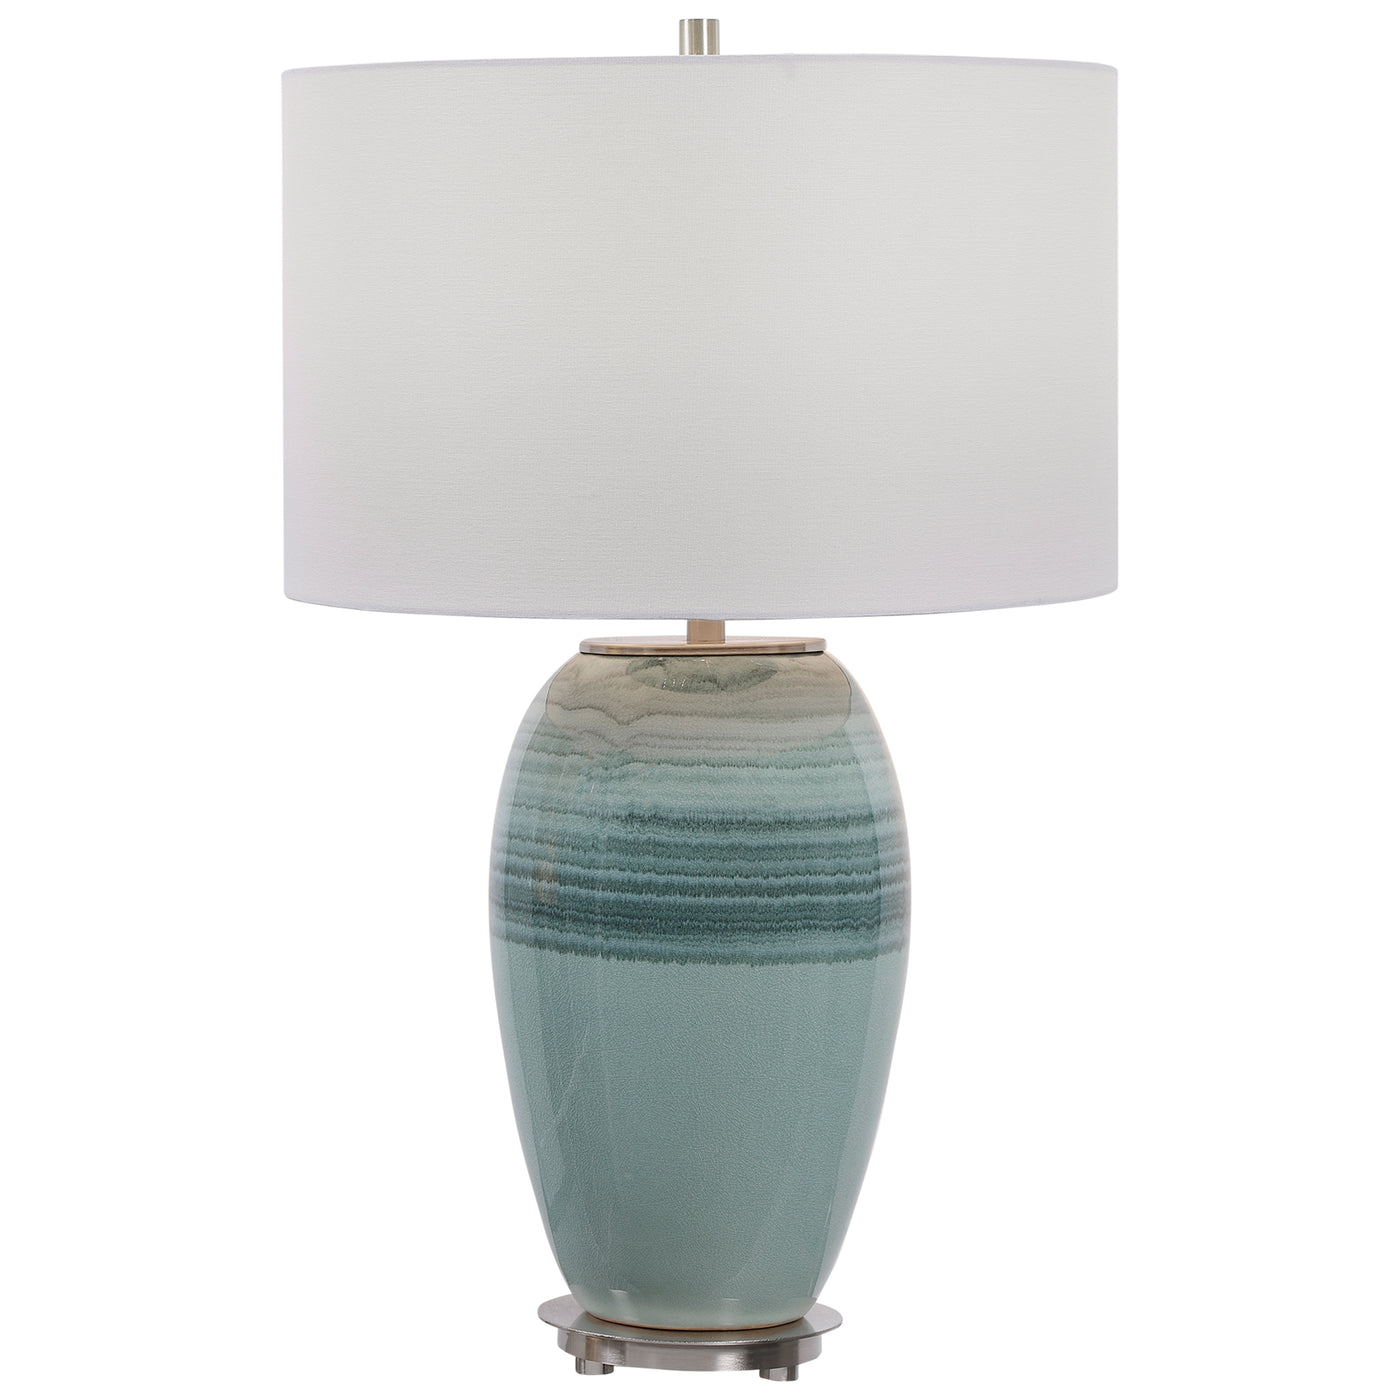 This Ceramic Table Lamp Is Finished In A Beautiful Aqua And Teal Crackle Glaze Paired With Brushed Nickel Plated Accents T...